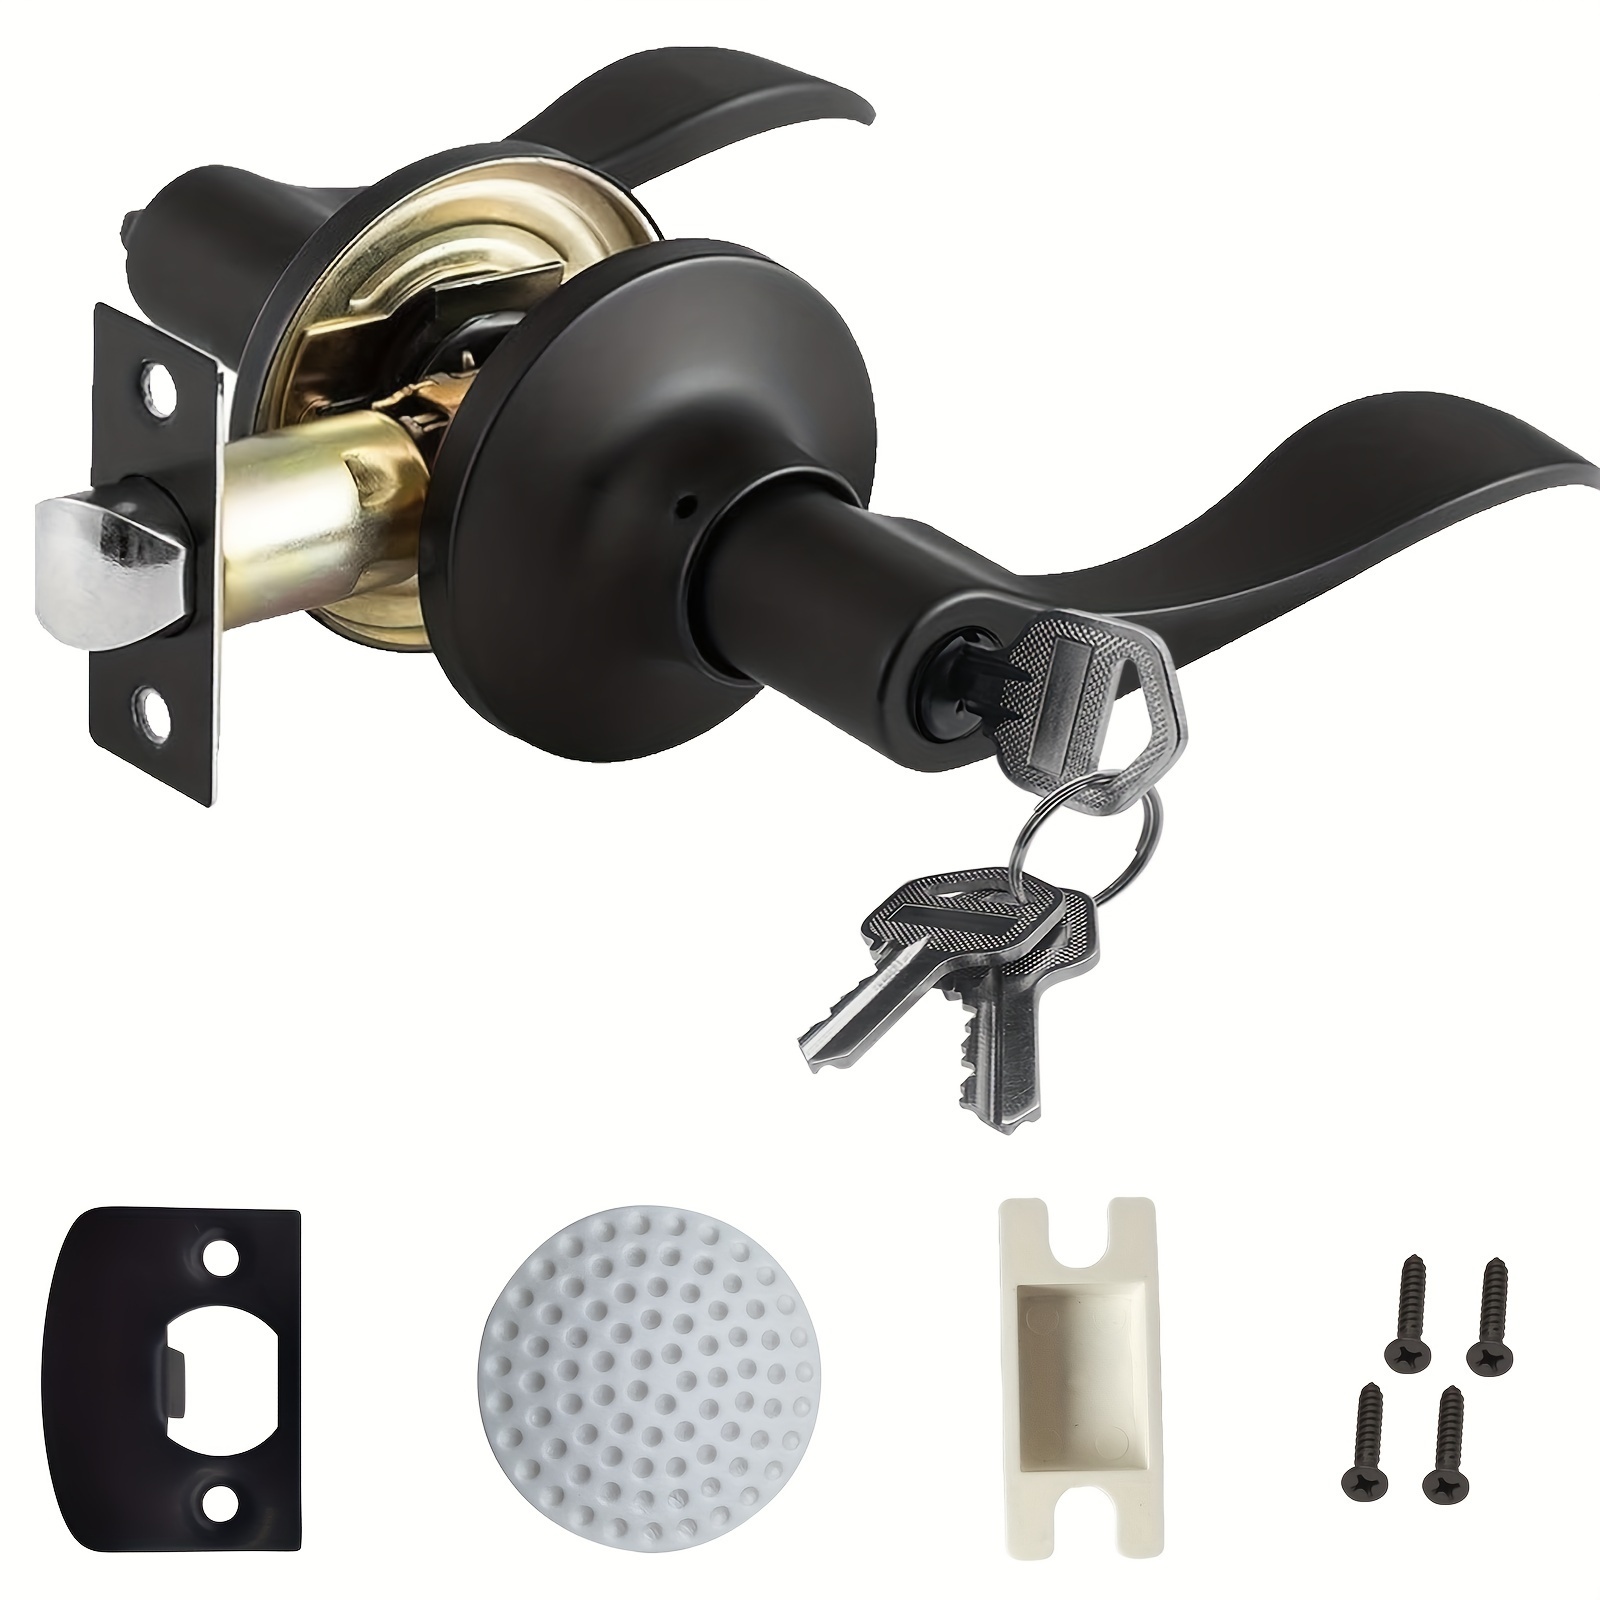 

Heavy-duty Black Metal Door Handle With Key And Lock - Durable, Secure For Home & Office Use - Easy Install Door Locks For Home Keyless Entry Door Lock With Handle